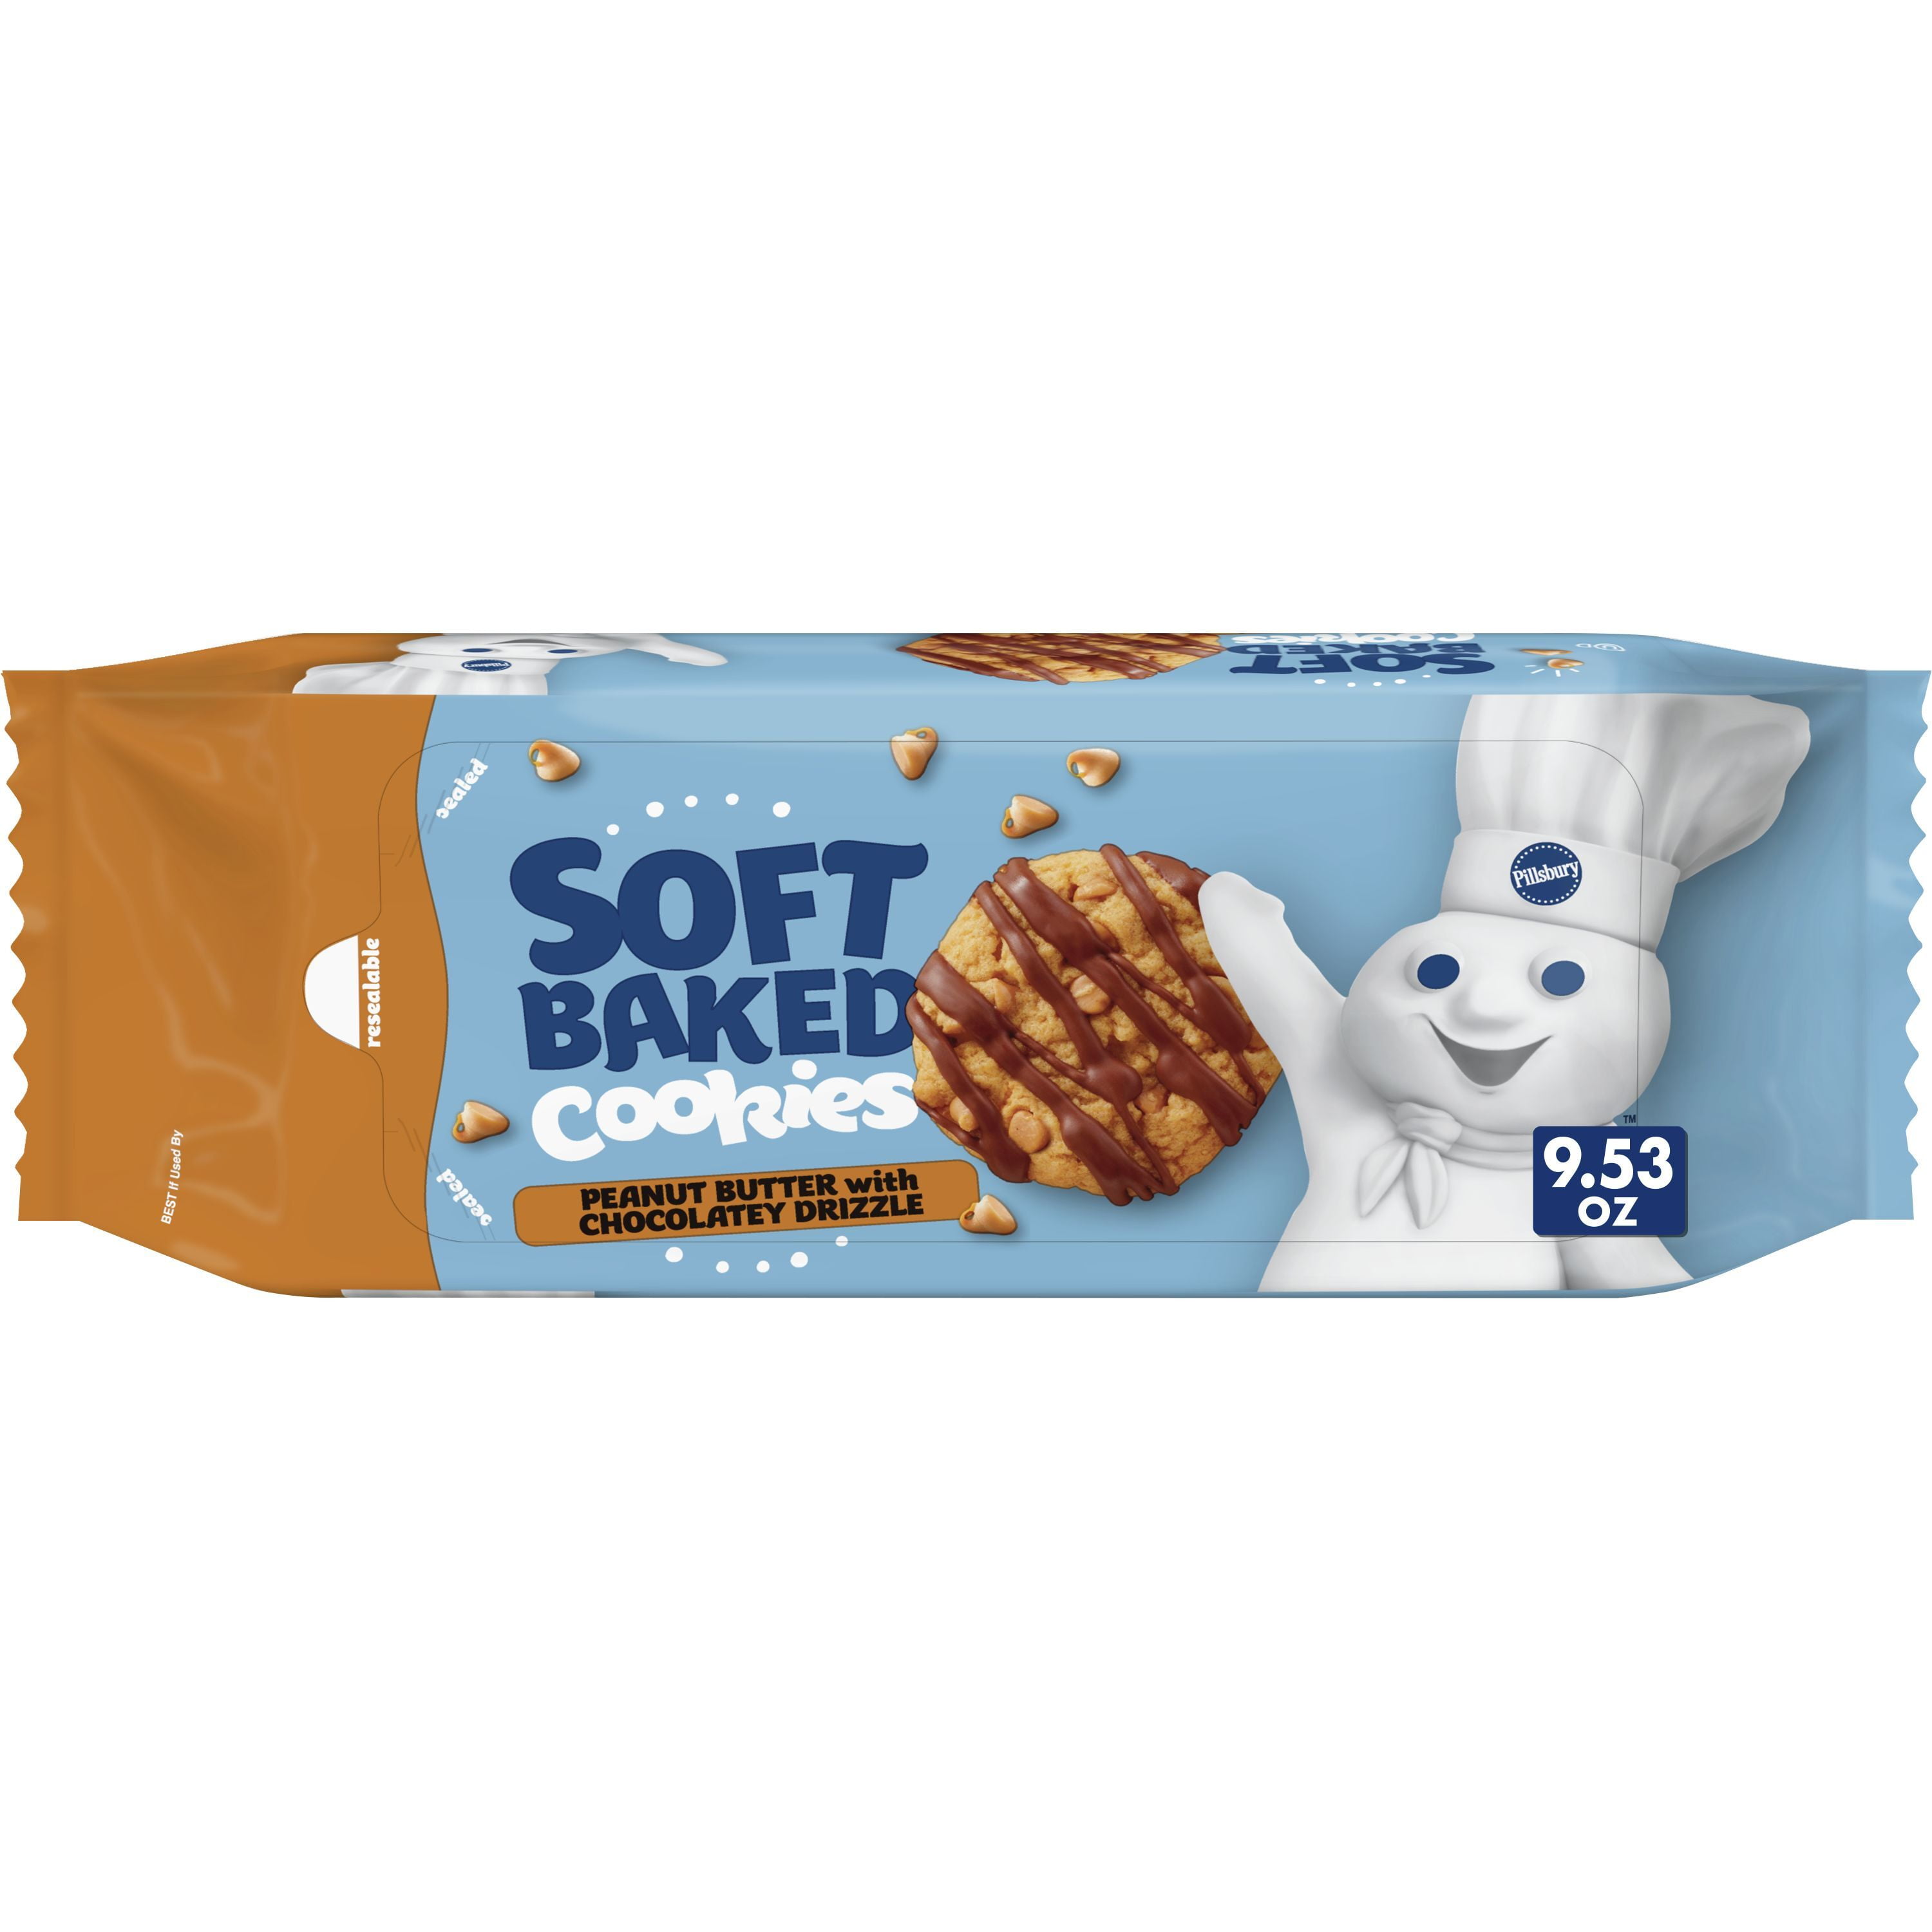 Pillsbury Soft Baked Cookies, Peanut Butter with Chocolatey Drizzle, 18 ct